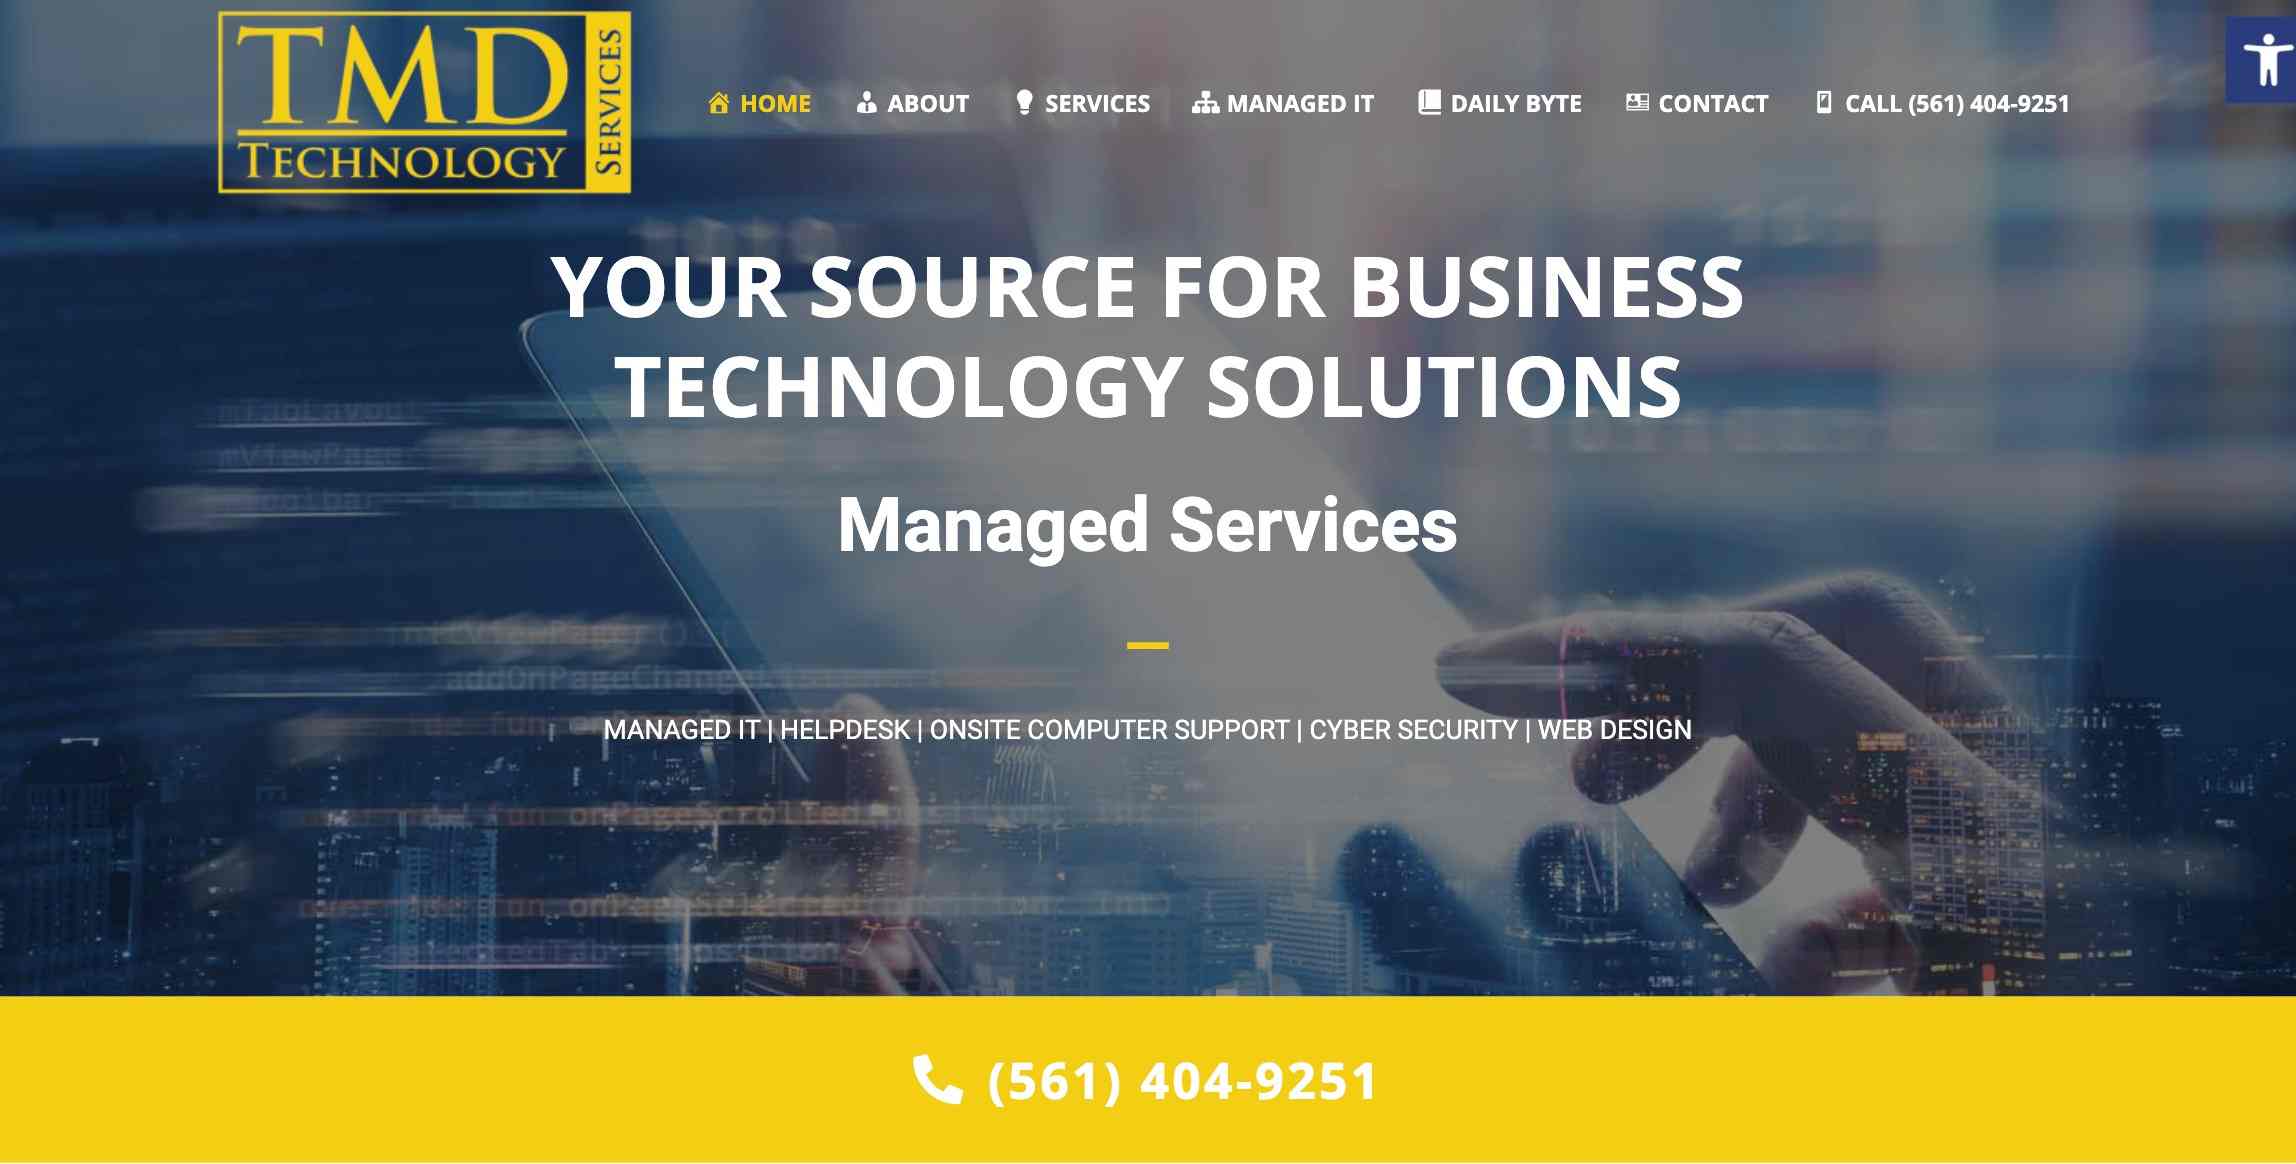 TMD Technology Services